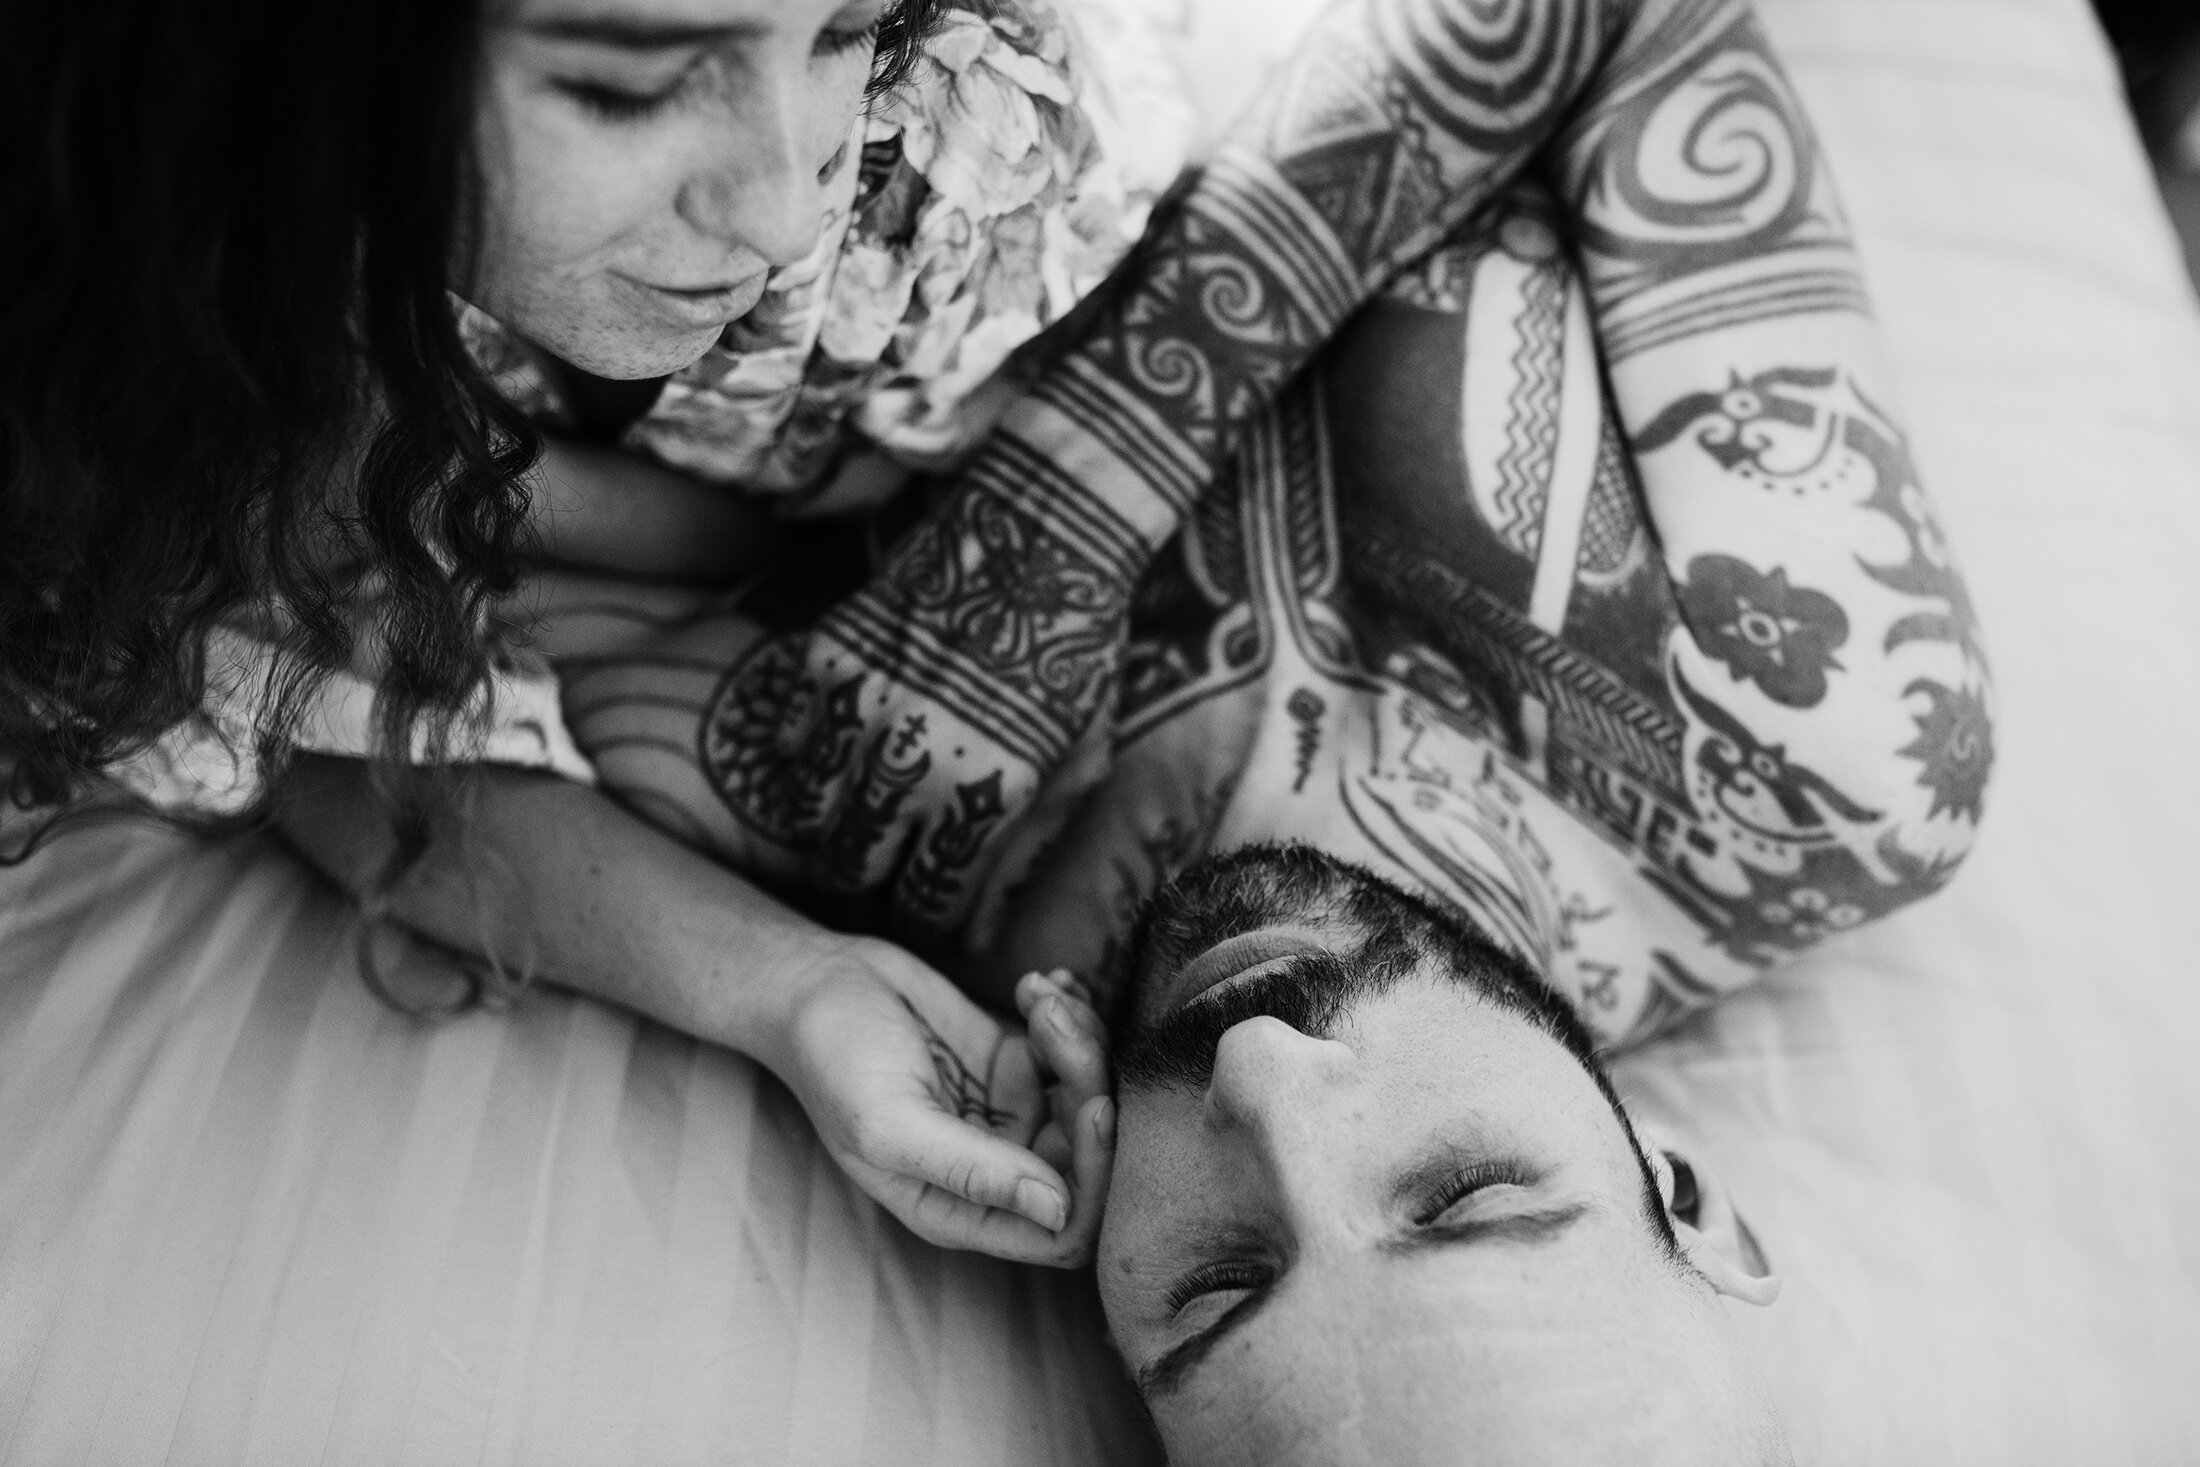 sf-couples-home-photography-bw.jpg